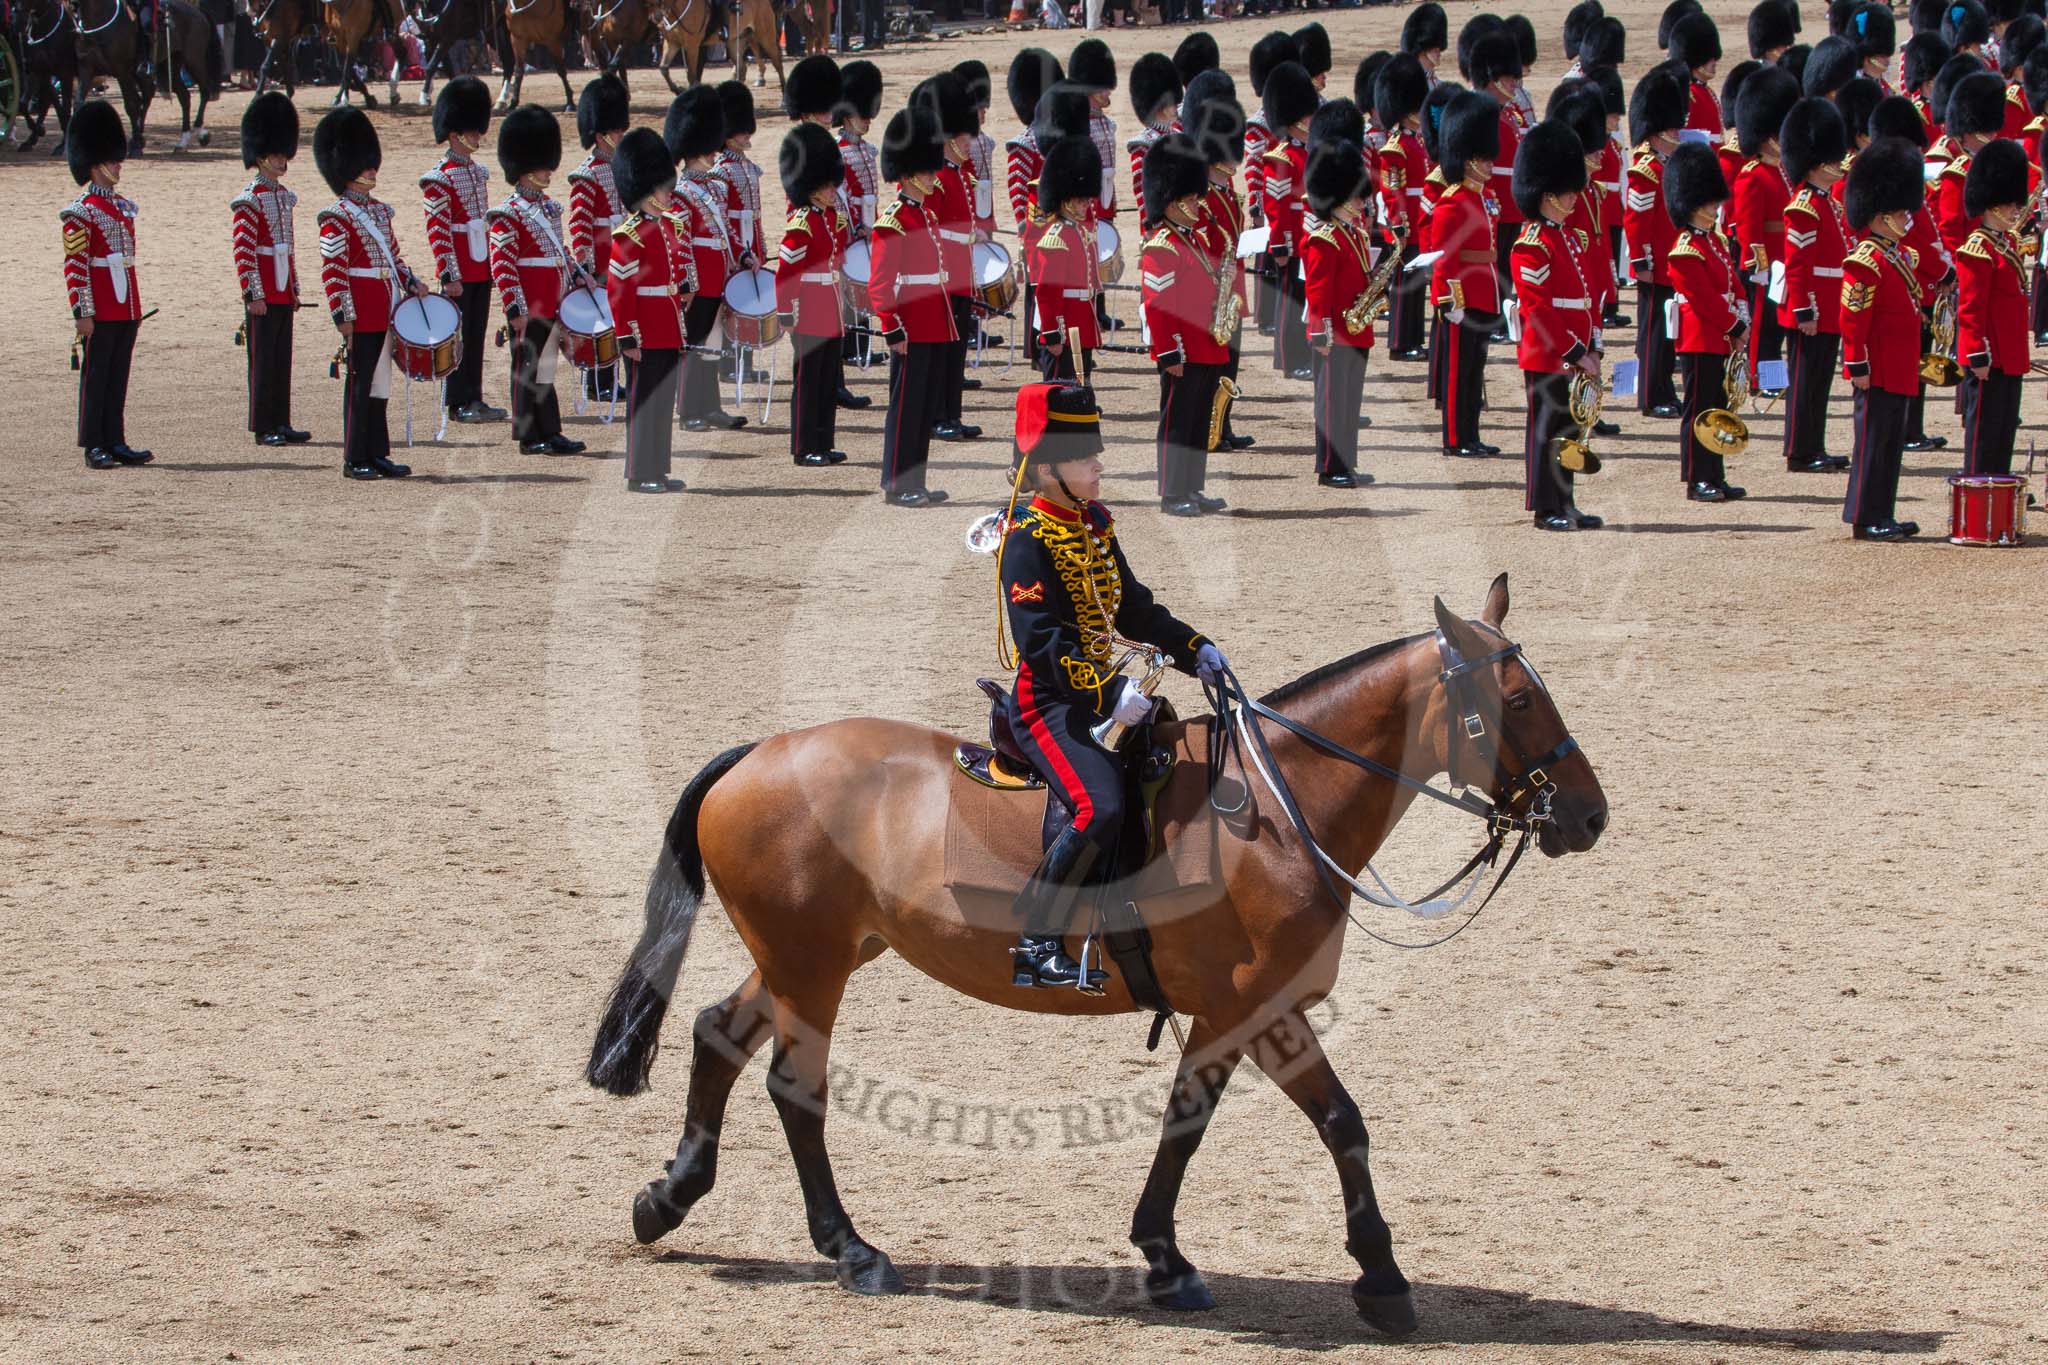 Trooping the Colour 2013: The Ride Past - the King's Troop Royal Horse Artillery..
Horse Guards Parade, Westminster,
London SW1,

United Kingdom,
on 15 June 2013 at 11:54, image #663